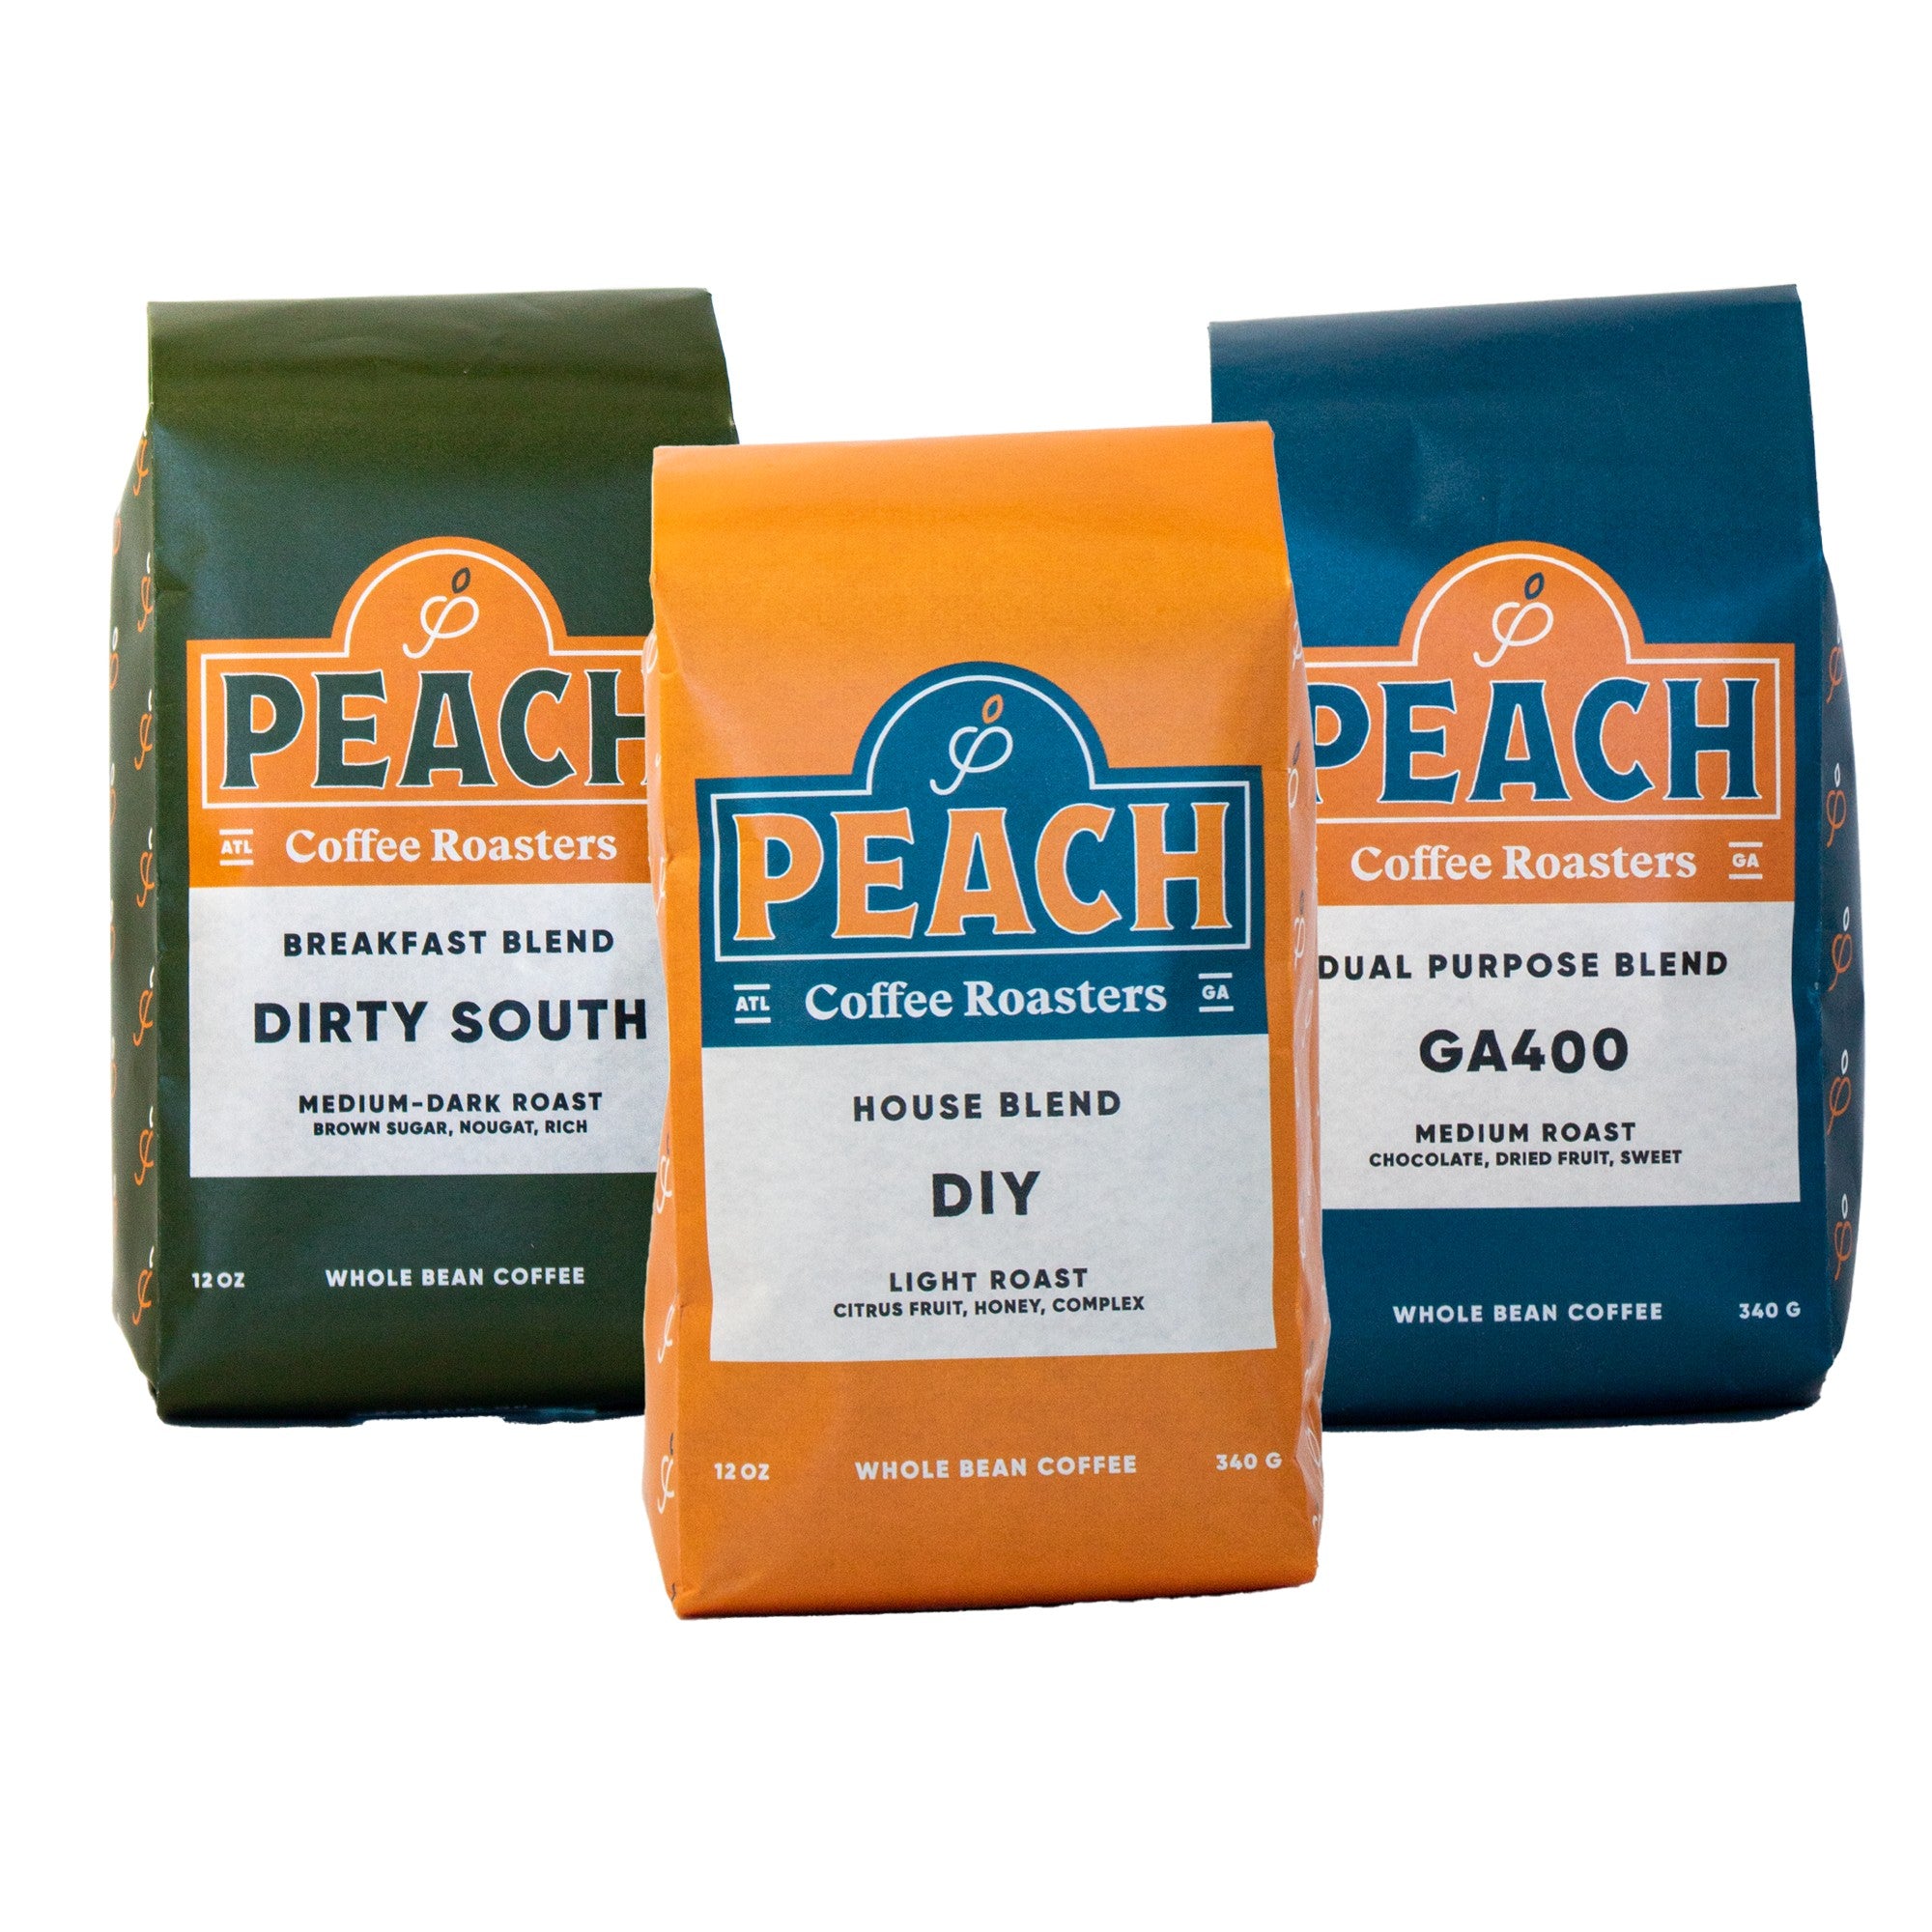 3 Month Coffee Gift Subscription - Shipping Included Peach Coffee Roasters